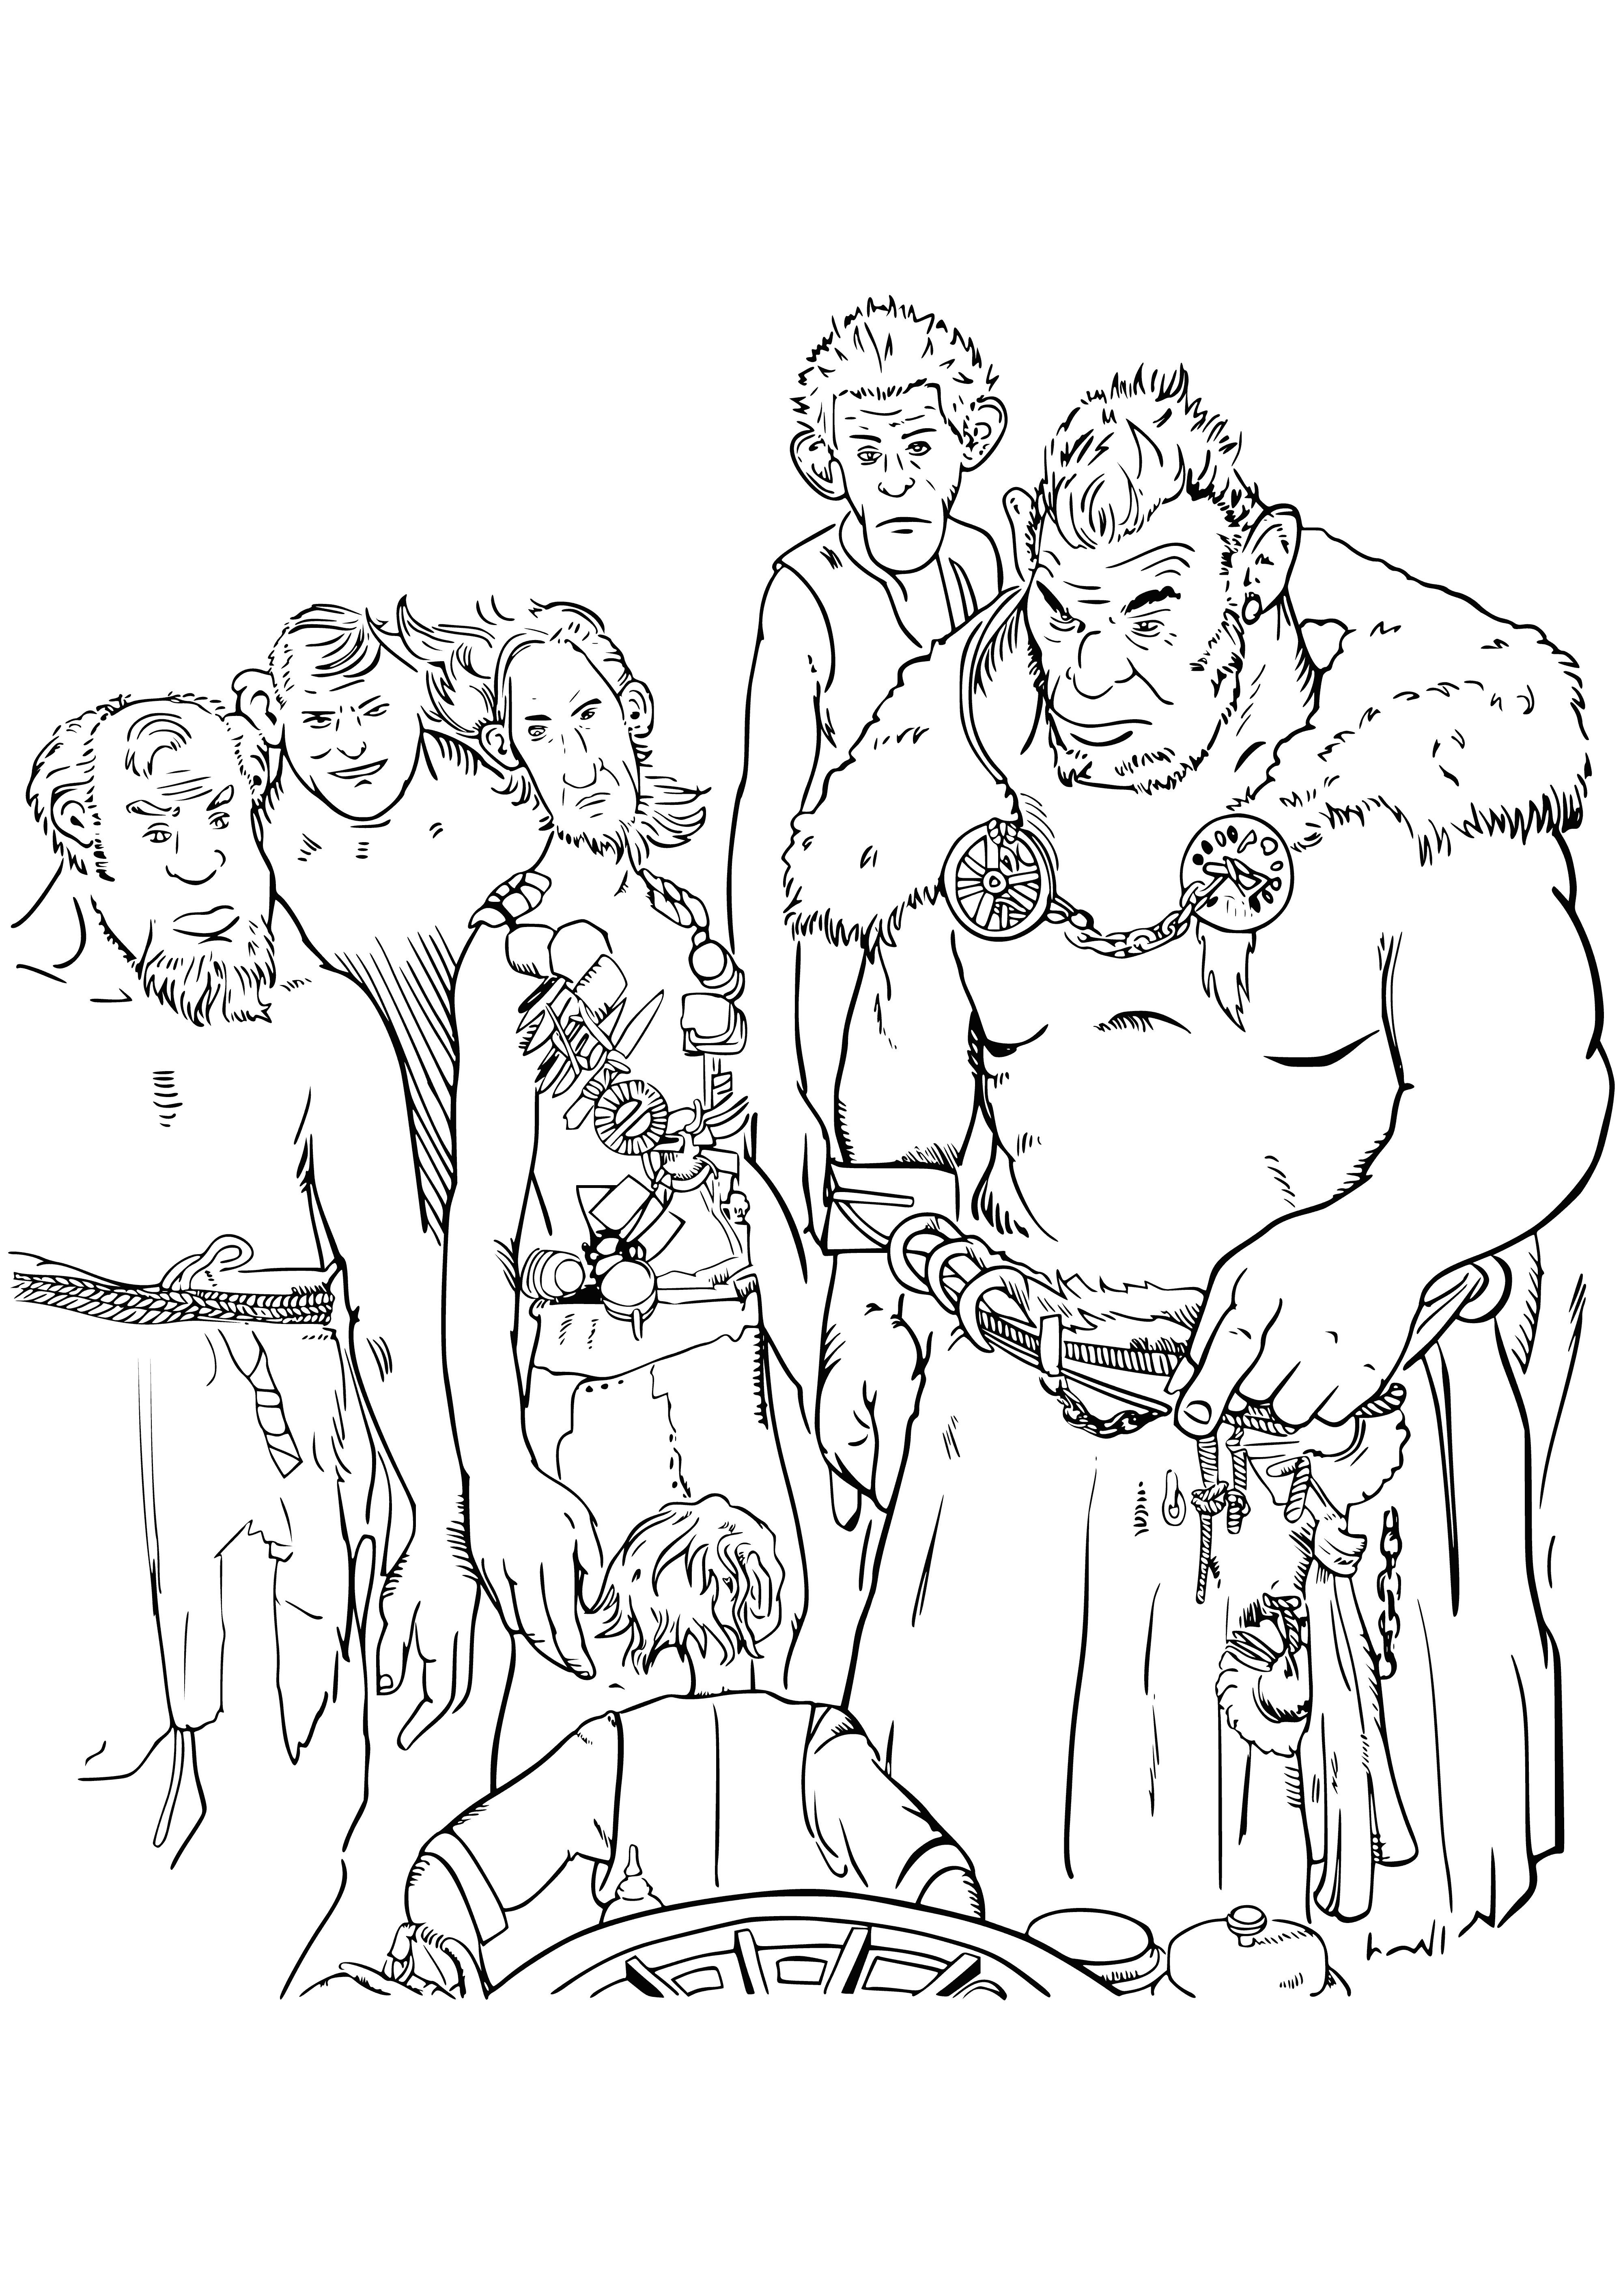 coloring page: The BFG is a gentle giant who protects humans from evil, cannibalistic giants.